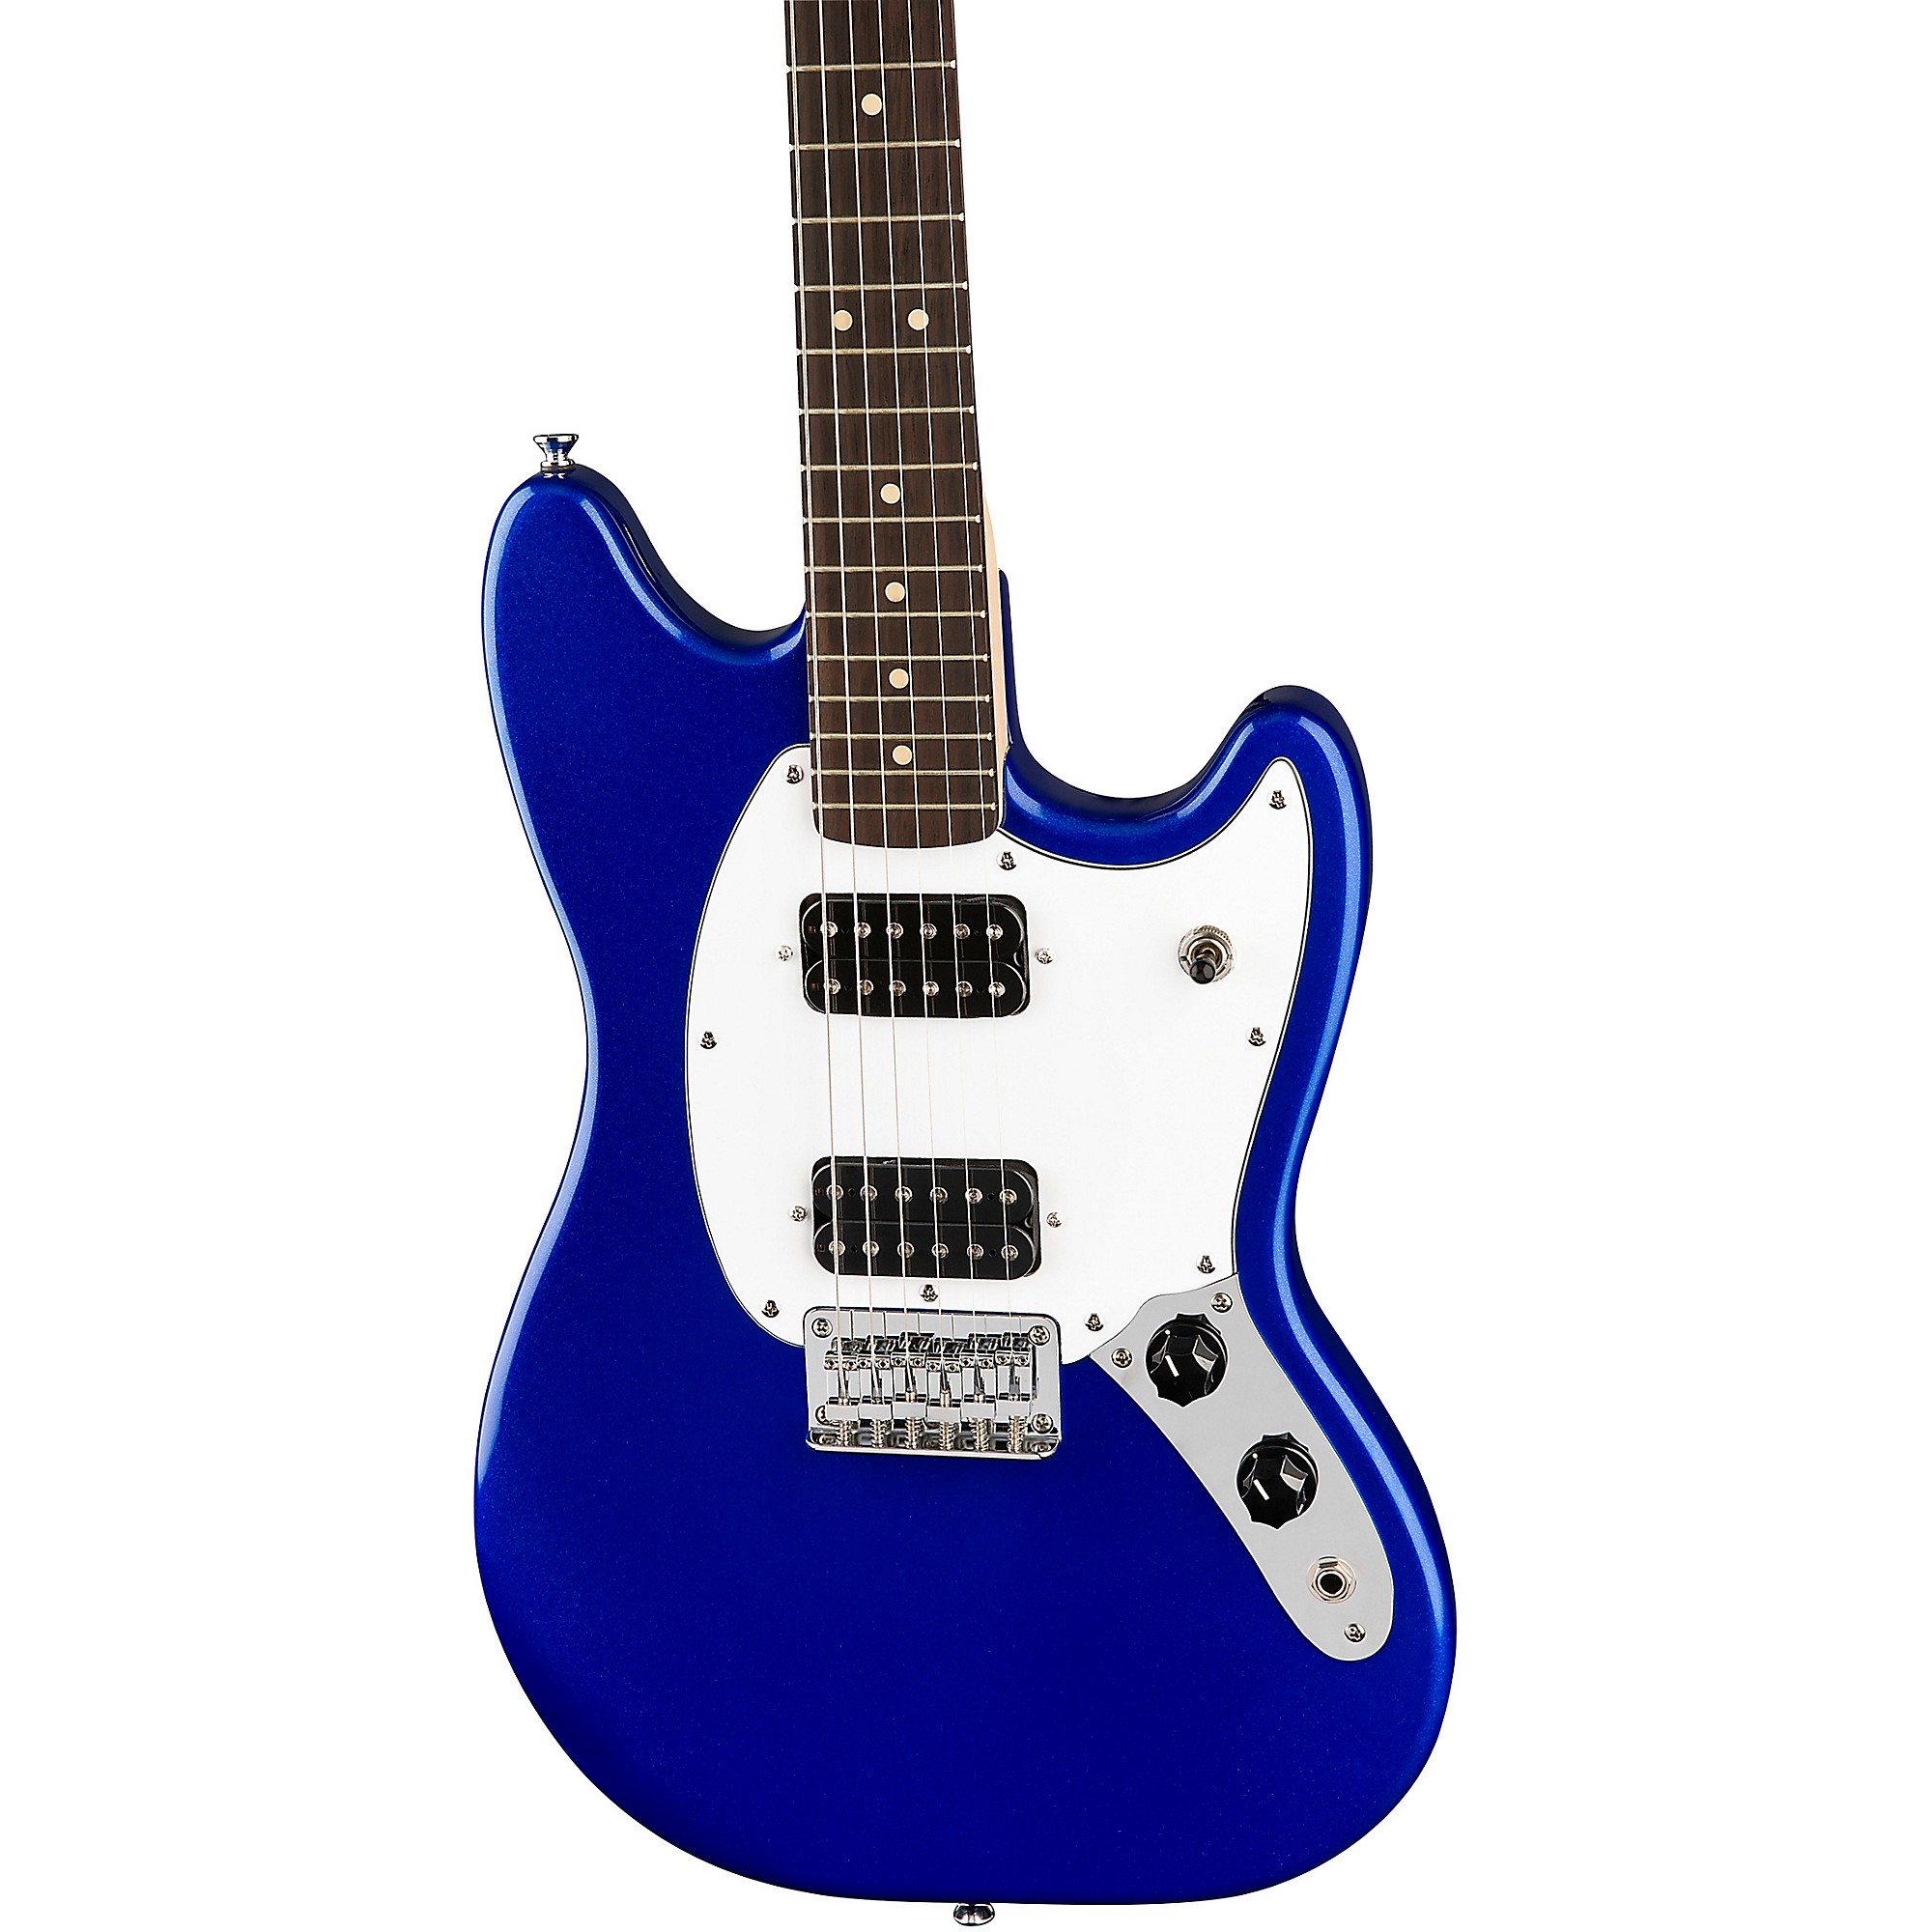 Squier Bullet Mustang HH Electric Guitar Imperial Blue | Guitar Center